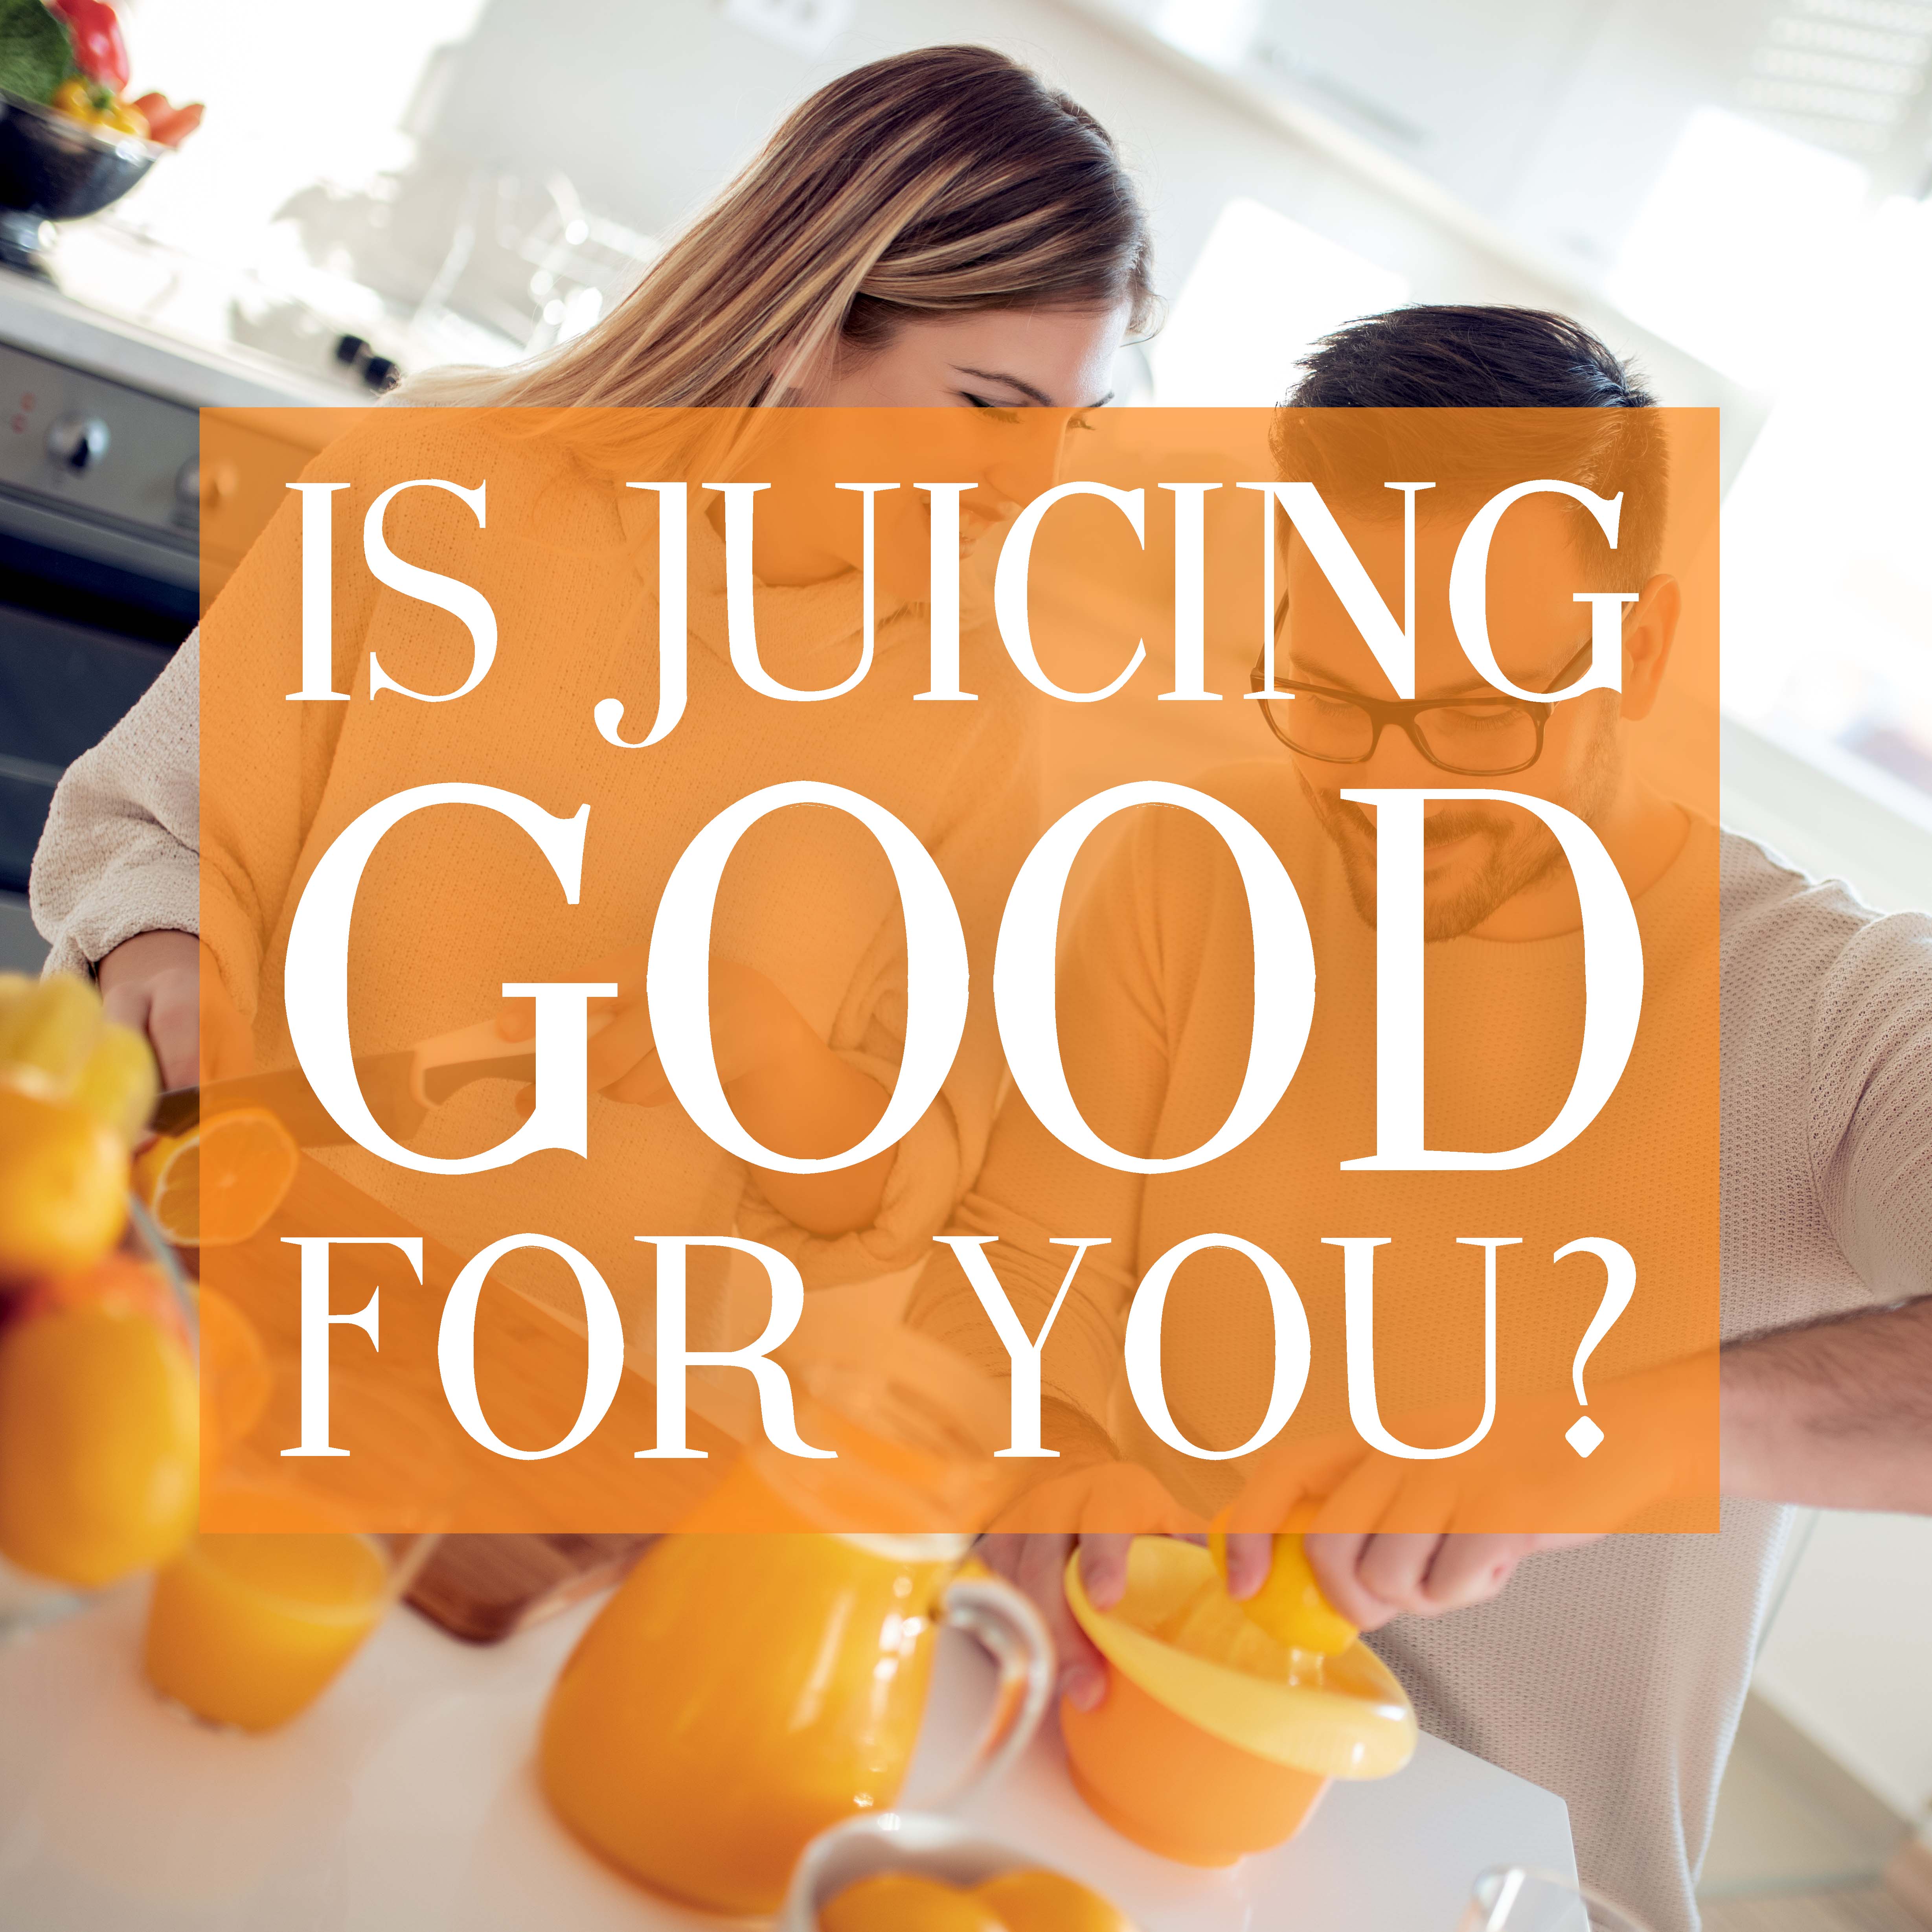 What Are the Benefits of Juicing?